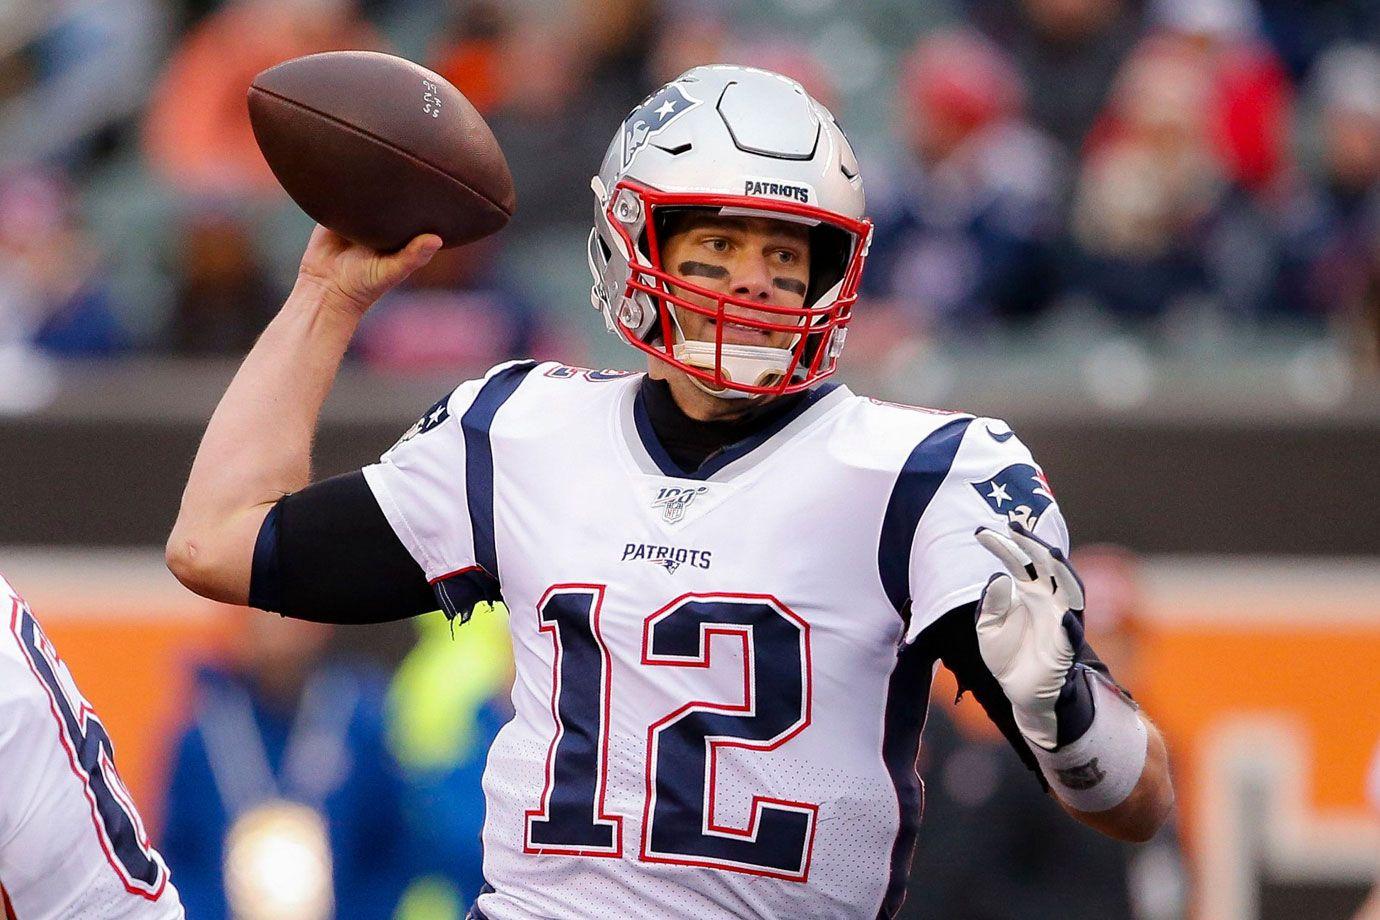 Ex-New England Patriot Tom Brady watched Super Bowl 51 comeback Sunday,  shared his reactions on Instagram 